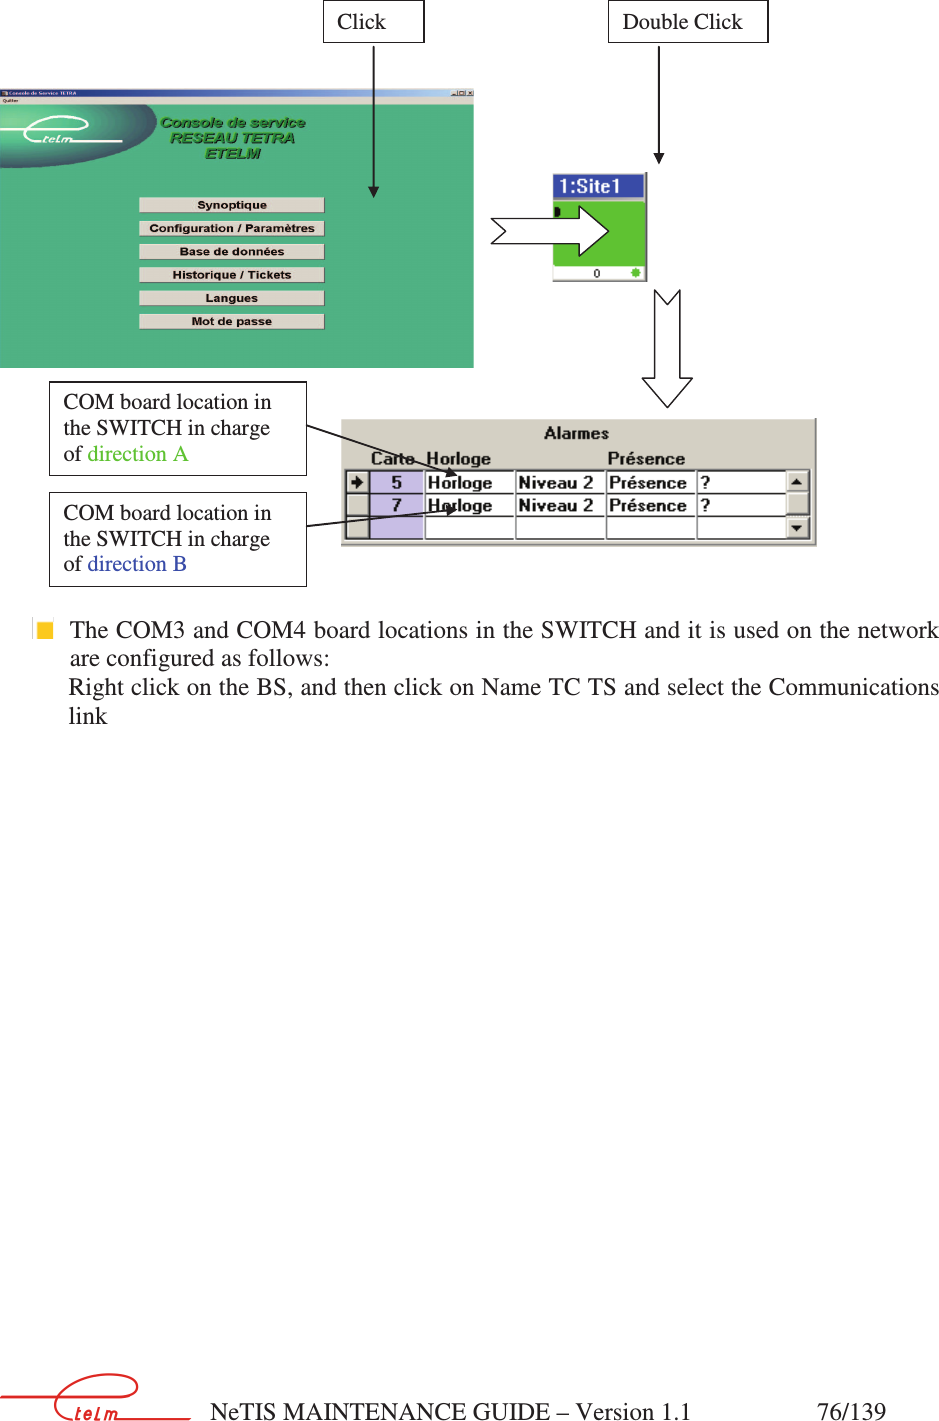        NeTIS MAINTENANCE GUIDE – Version 1.1                    76/139      The COM3 and COM4 board locations in the SWITCH and it is used on the network are configured as follows: Right click on the BS, and then click on Name TC TS and select the Communications link                                Click  Double Click COM board location in the SWITCH in charge of direction A COM board location in the SWITCH in charge of direction B 